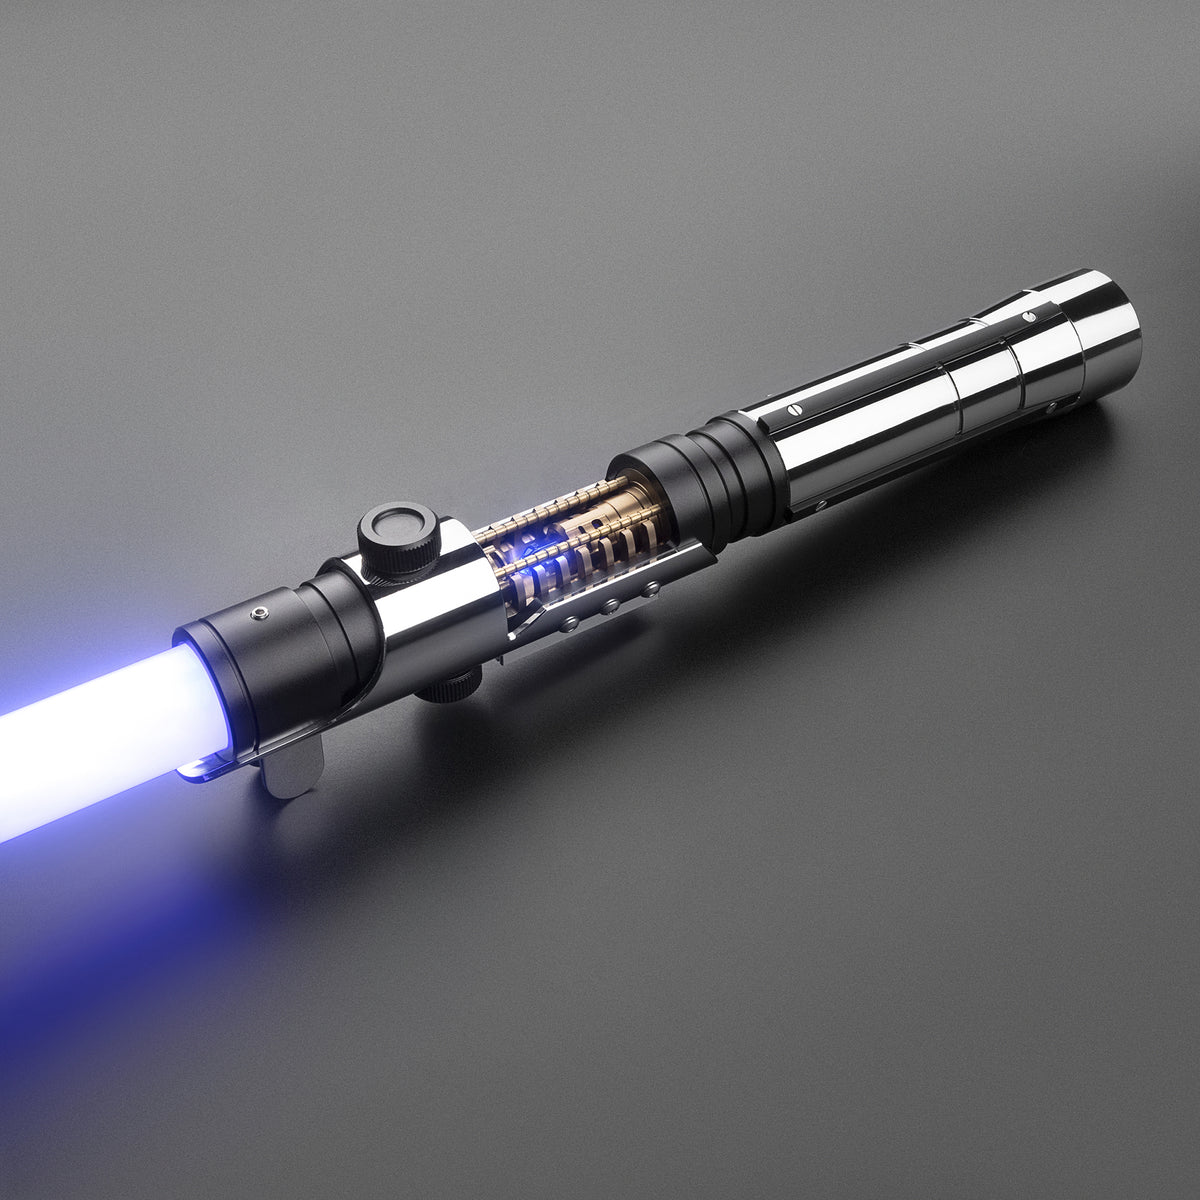 SaberCustom Kyber Crystal Xenopixel v3 Dueling Lightsaber 16 Sound Fonts Smooth Swing Infinite Colors Changing NO071